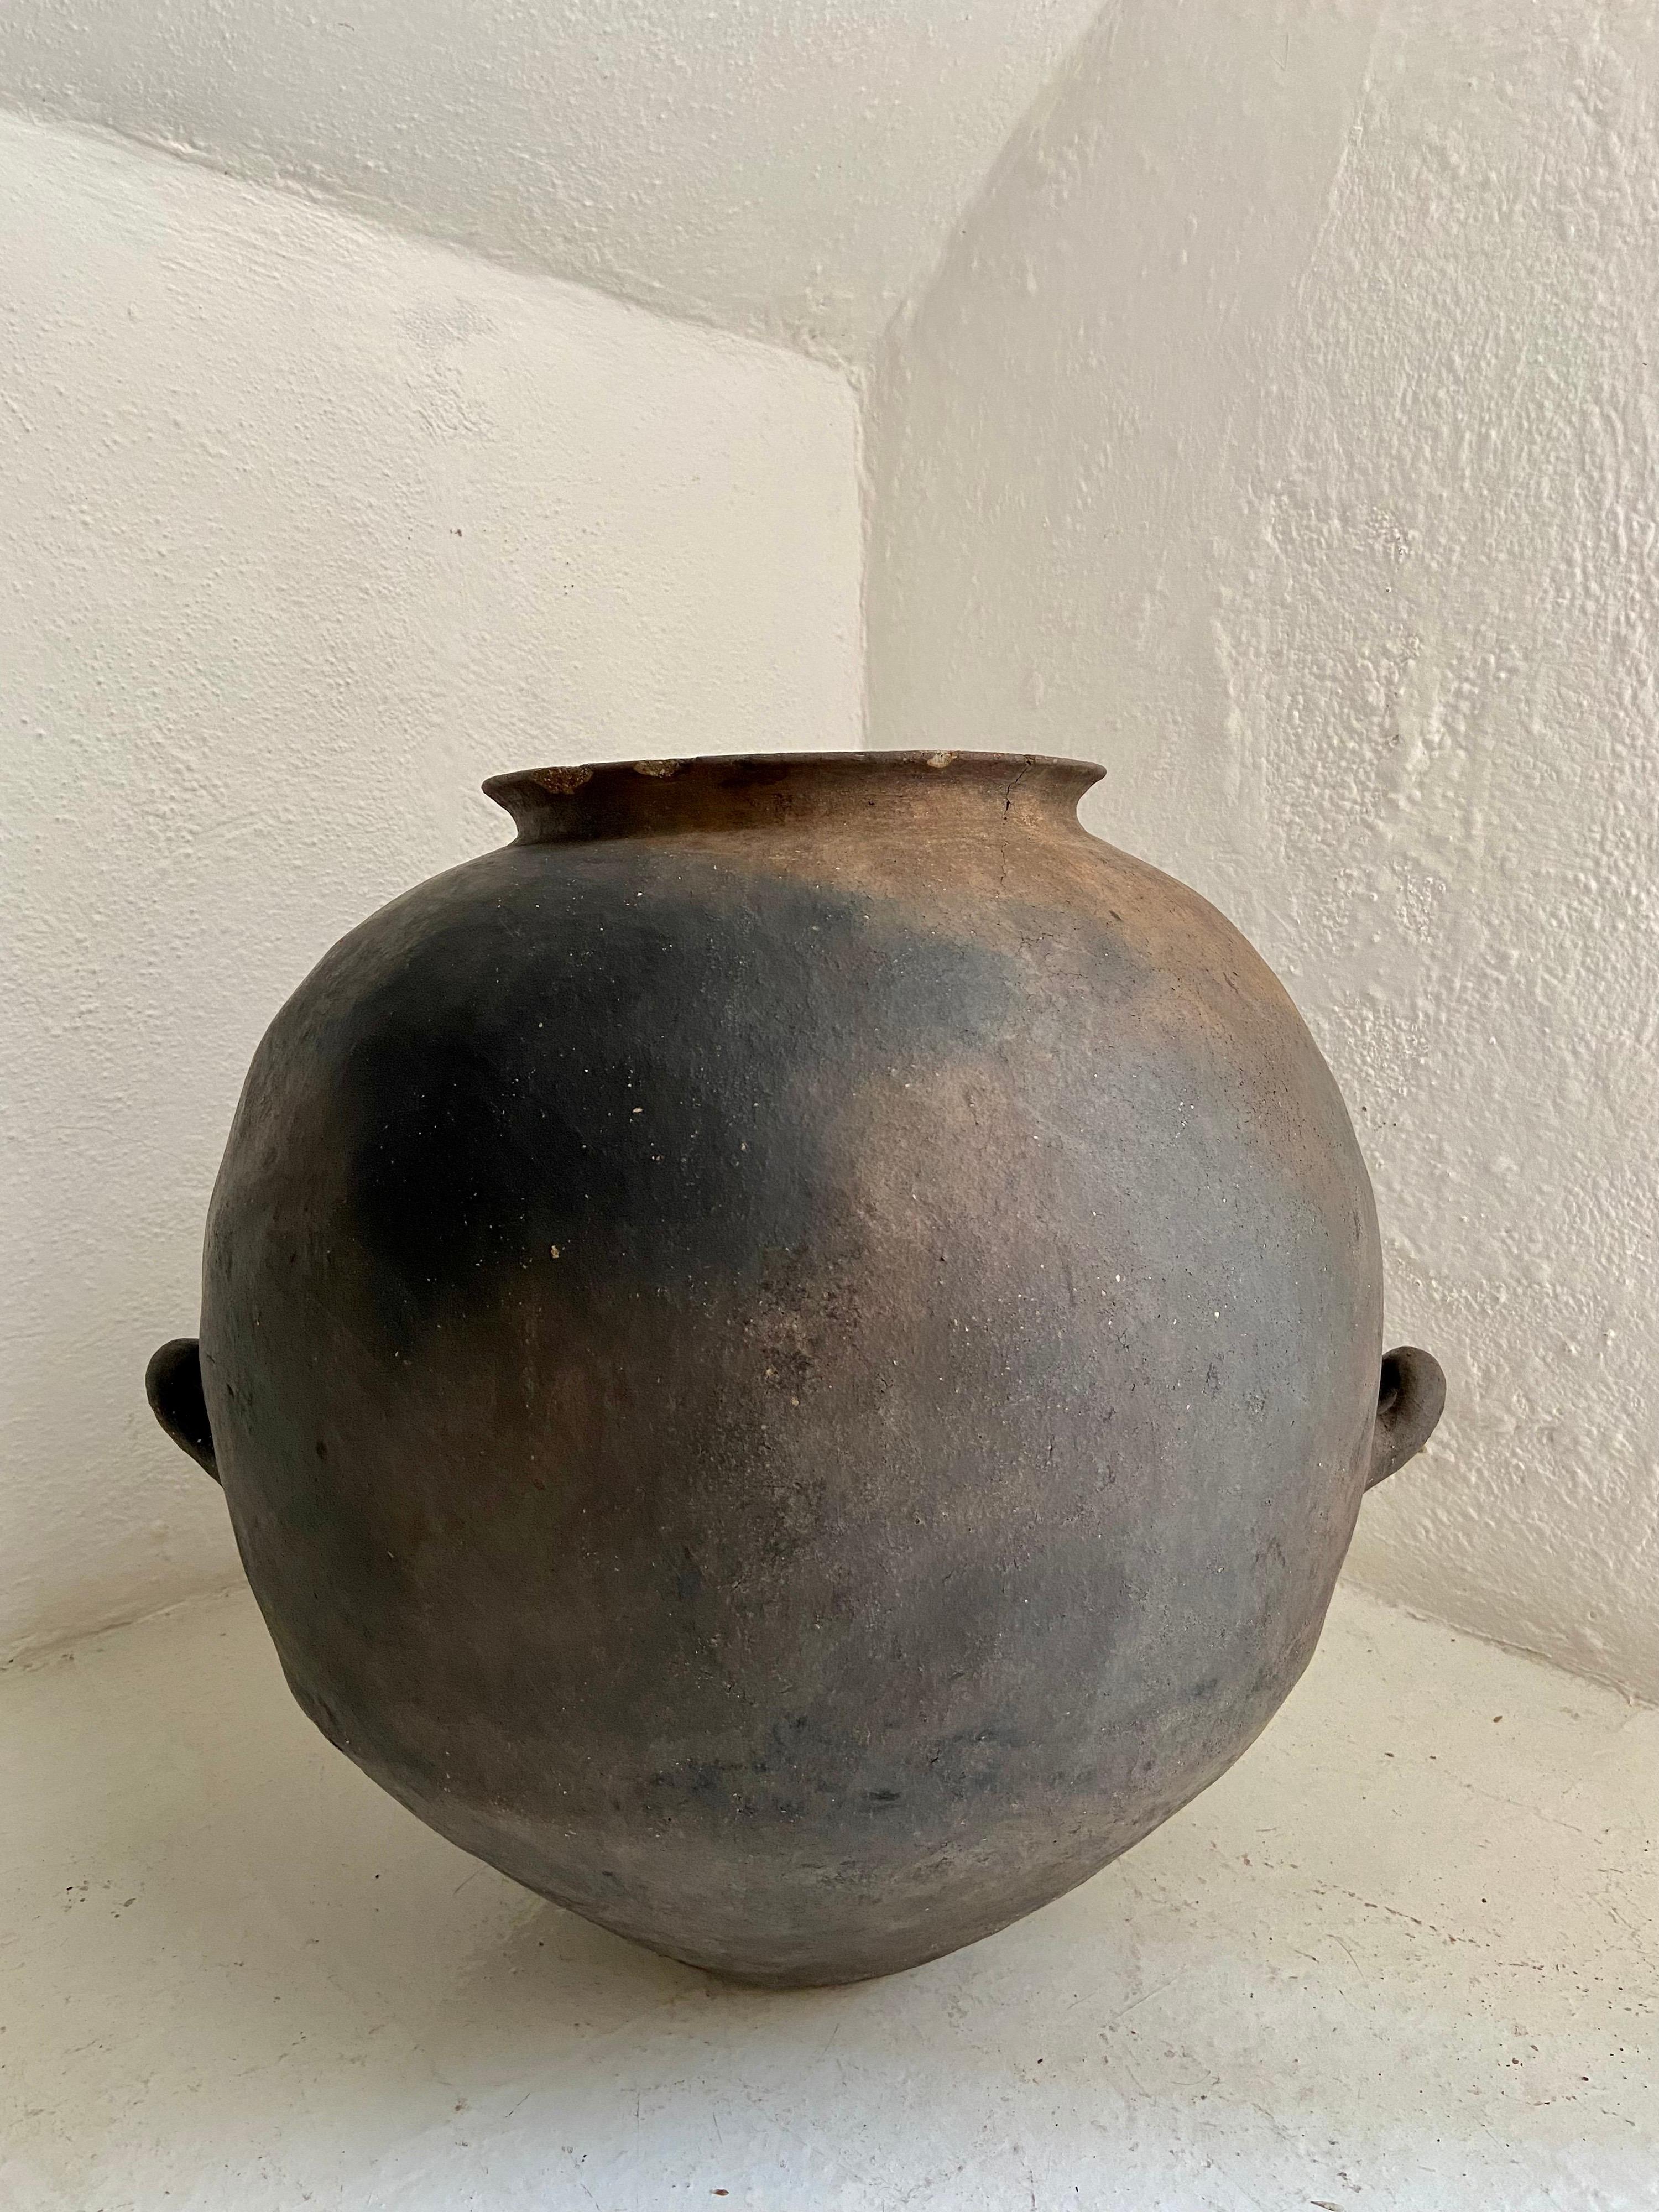 Hand-coiled terracotta water pot with support handles from the Nahua indigenous people of Northwestern Puebla, Early 20th Century. This style of pottery was discontinued over 60 years ago with the introduction of plastics.